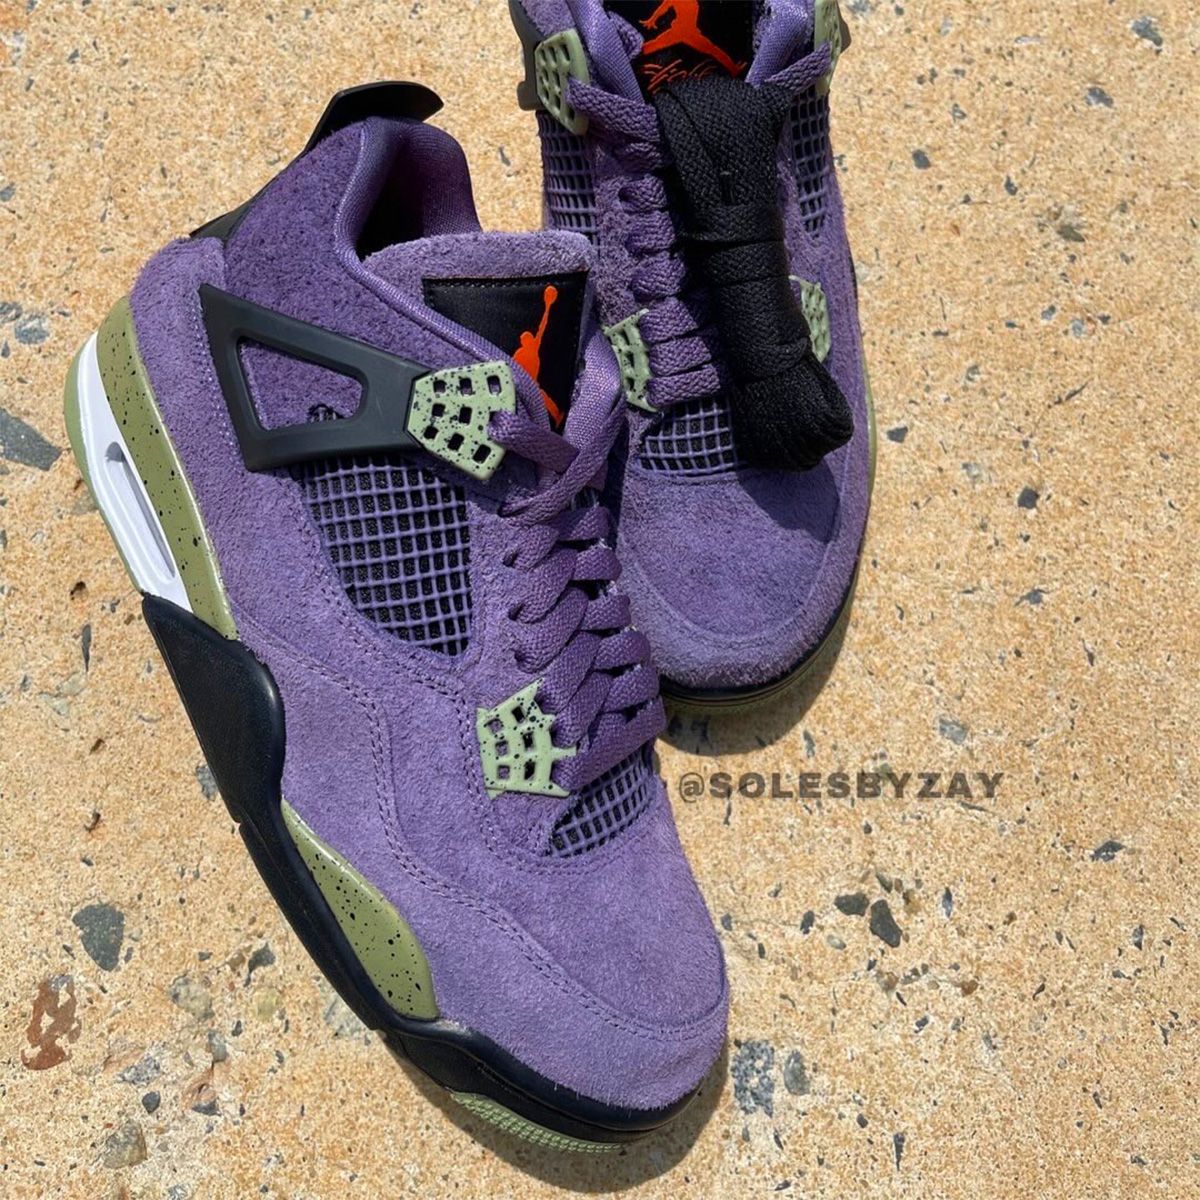 Where to Buy the Air Jordan 4 “Canyon Purple” | House of Heat°